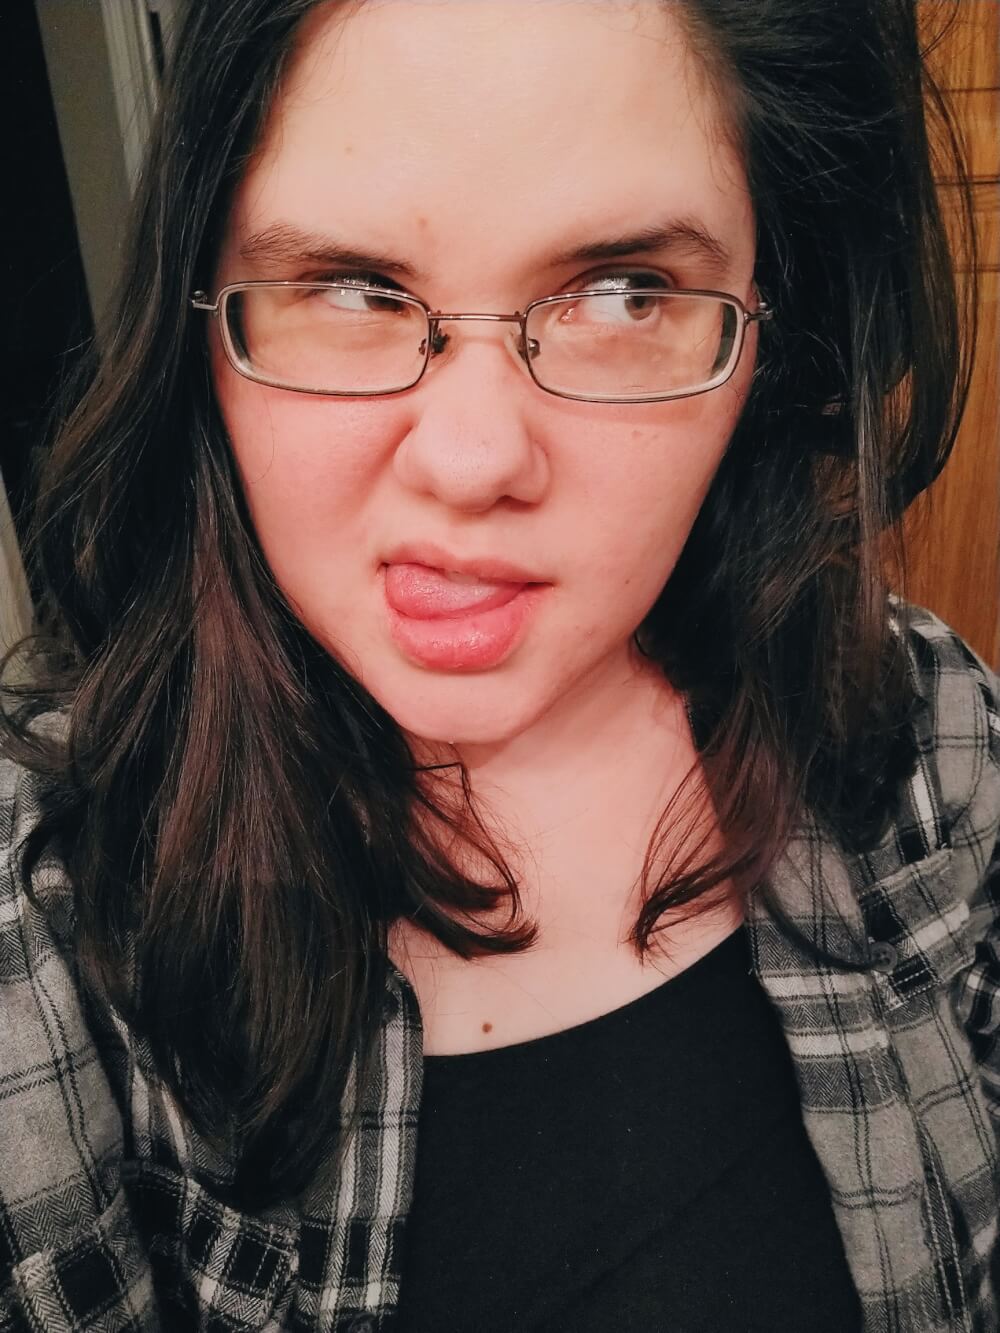 Silly selfie in black plaid flannel with tongue out